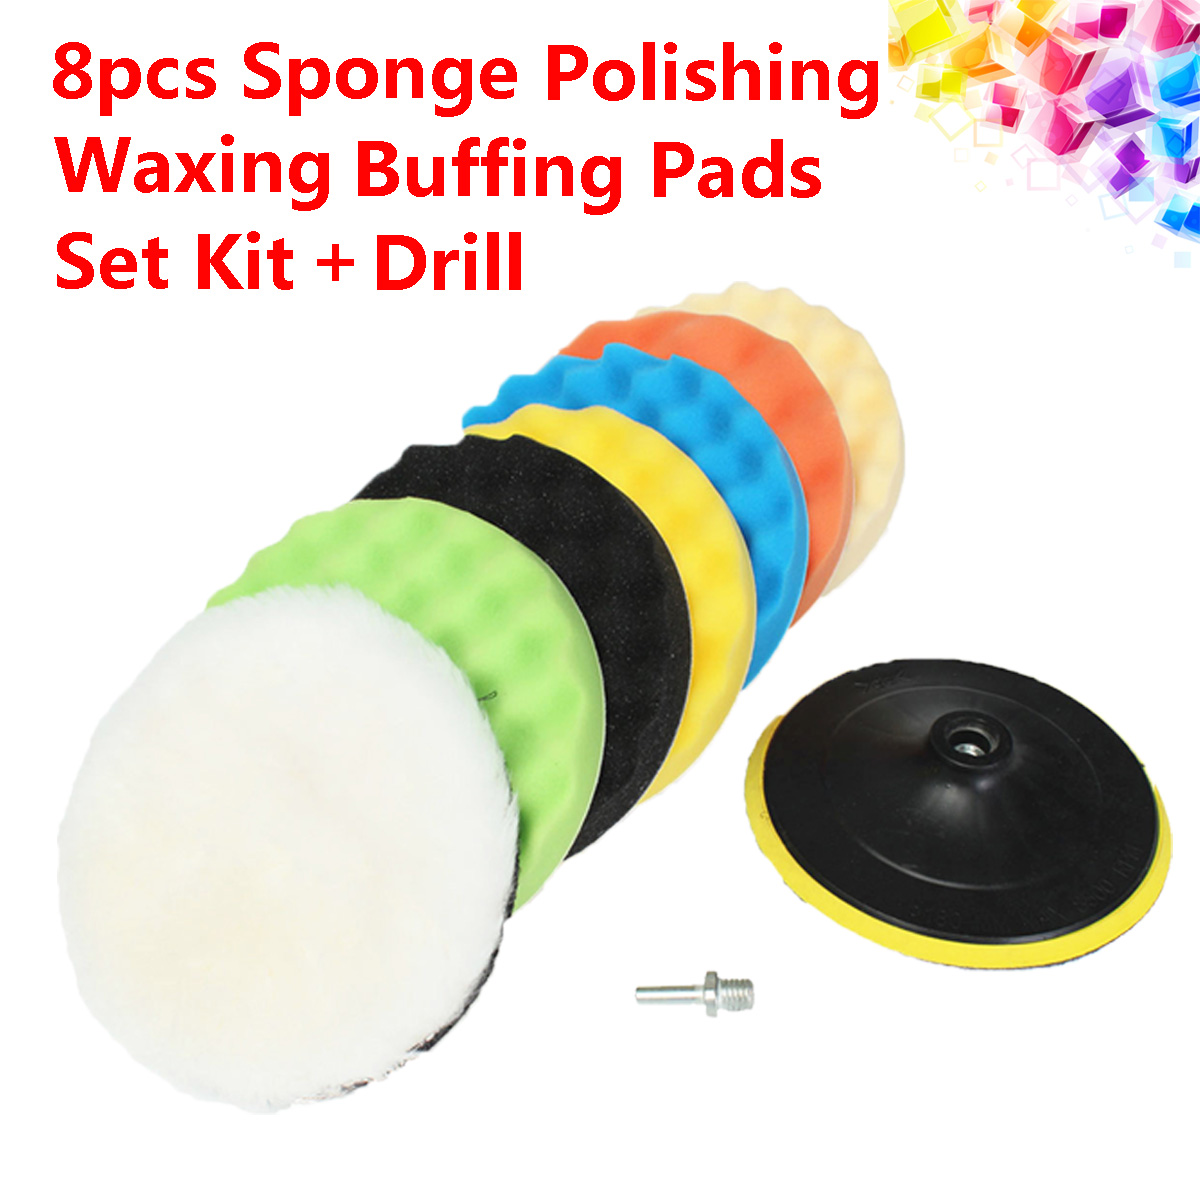 8Pcs 7 inch Car Polishing Waxing Buffing Pad Kit Compound Sponge Foam For Compound Auto Car Polisher with Drill